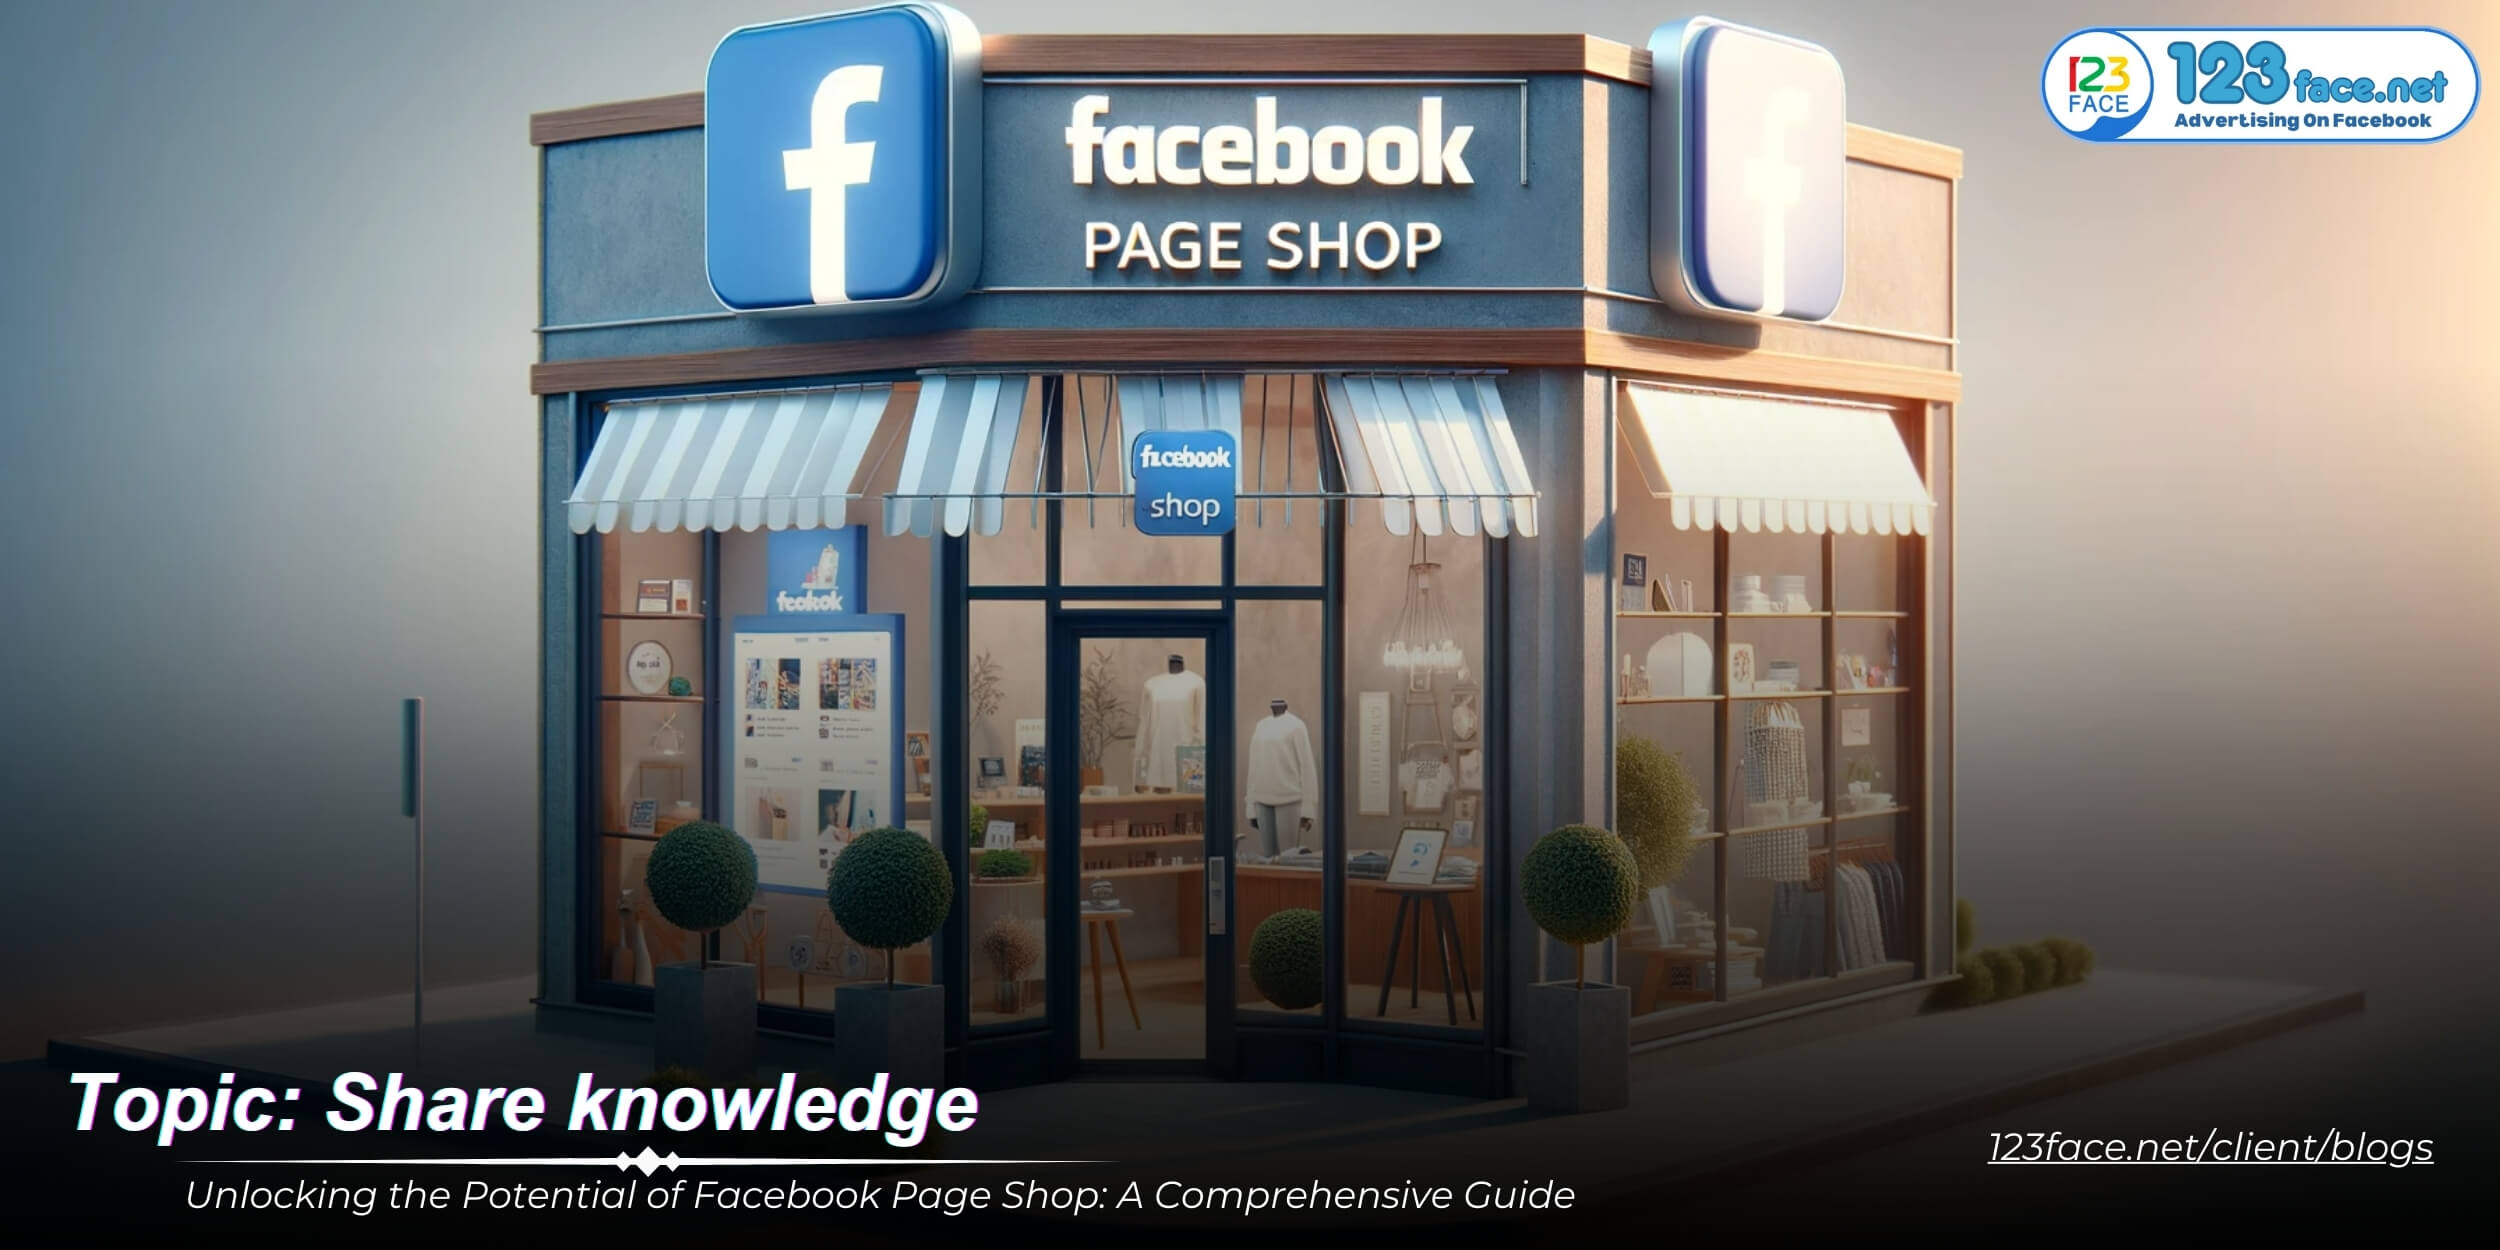 Unlocking the Potential of Facebook Page Shop: A Comprehensive Guide